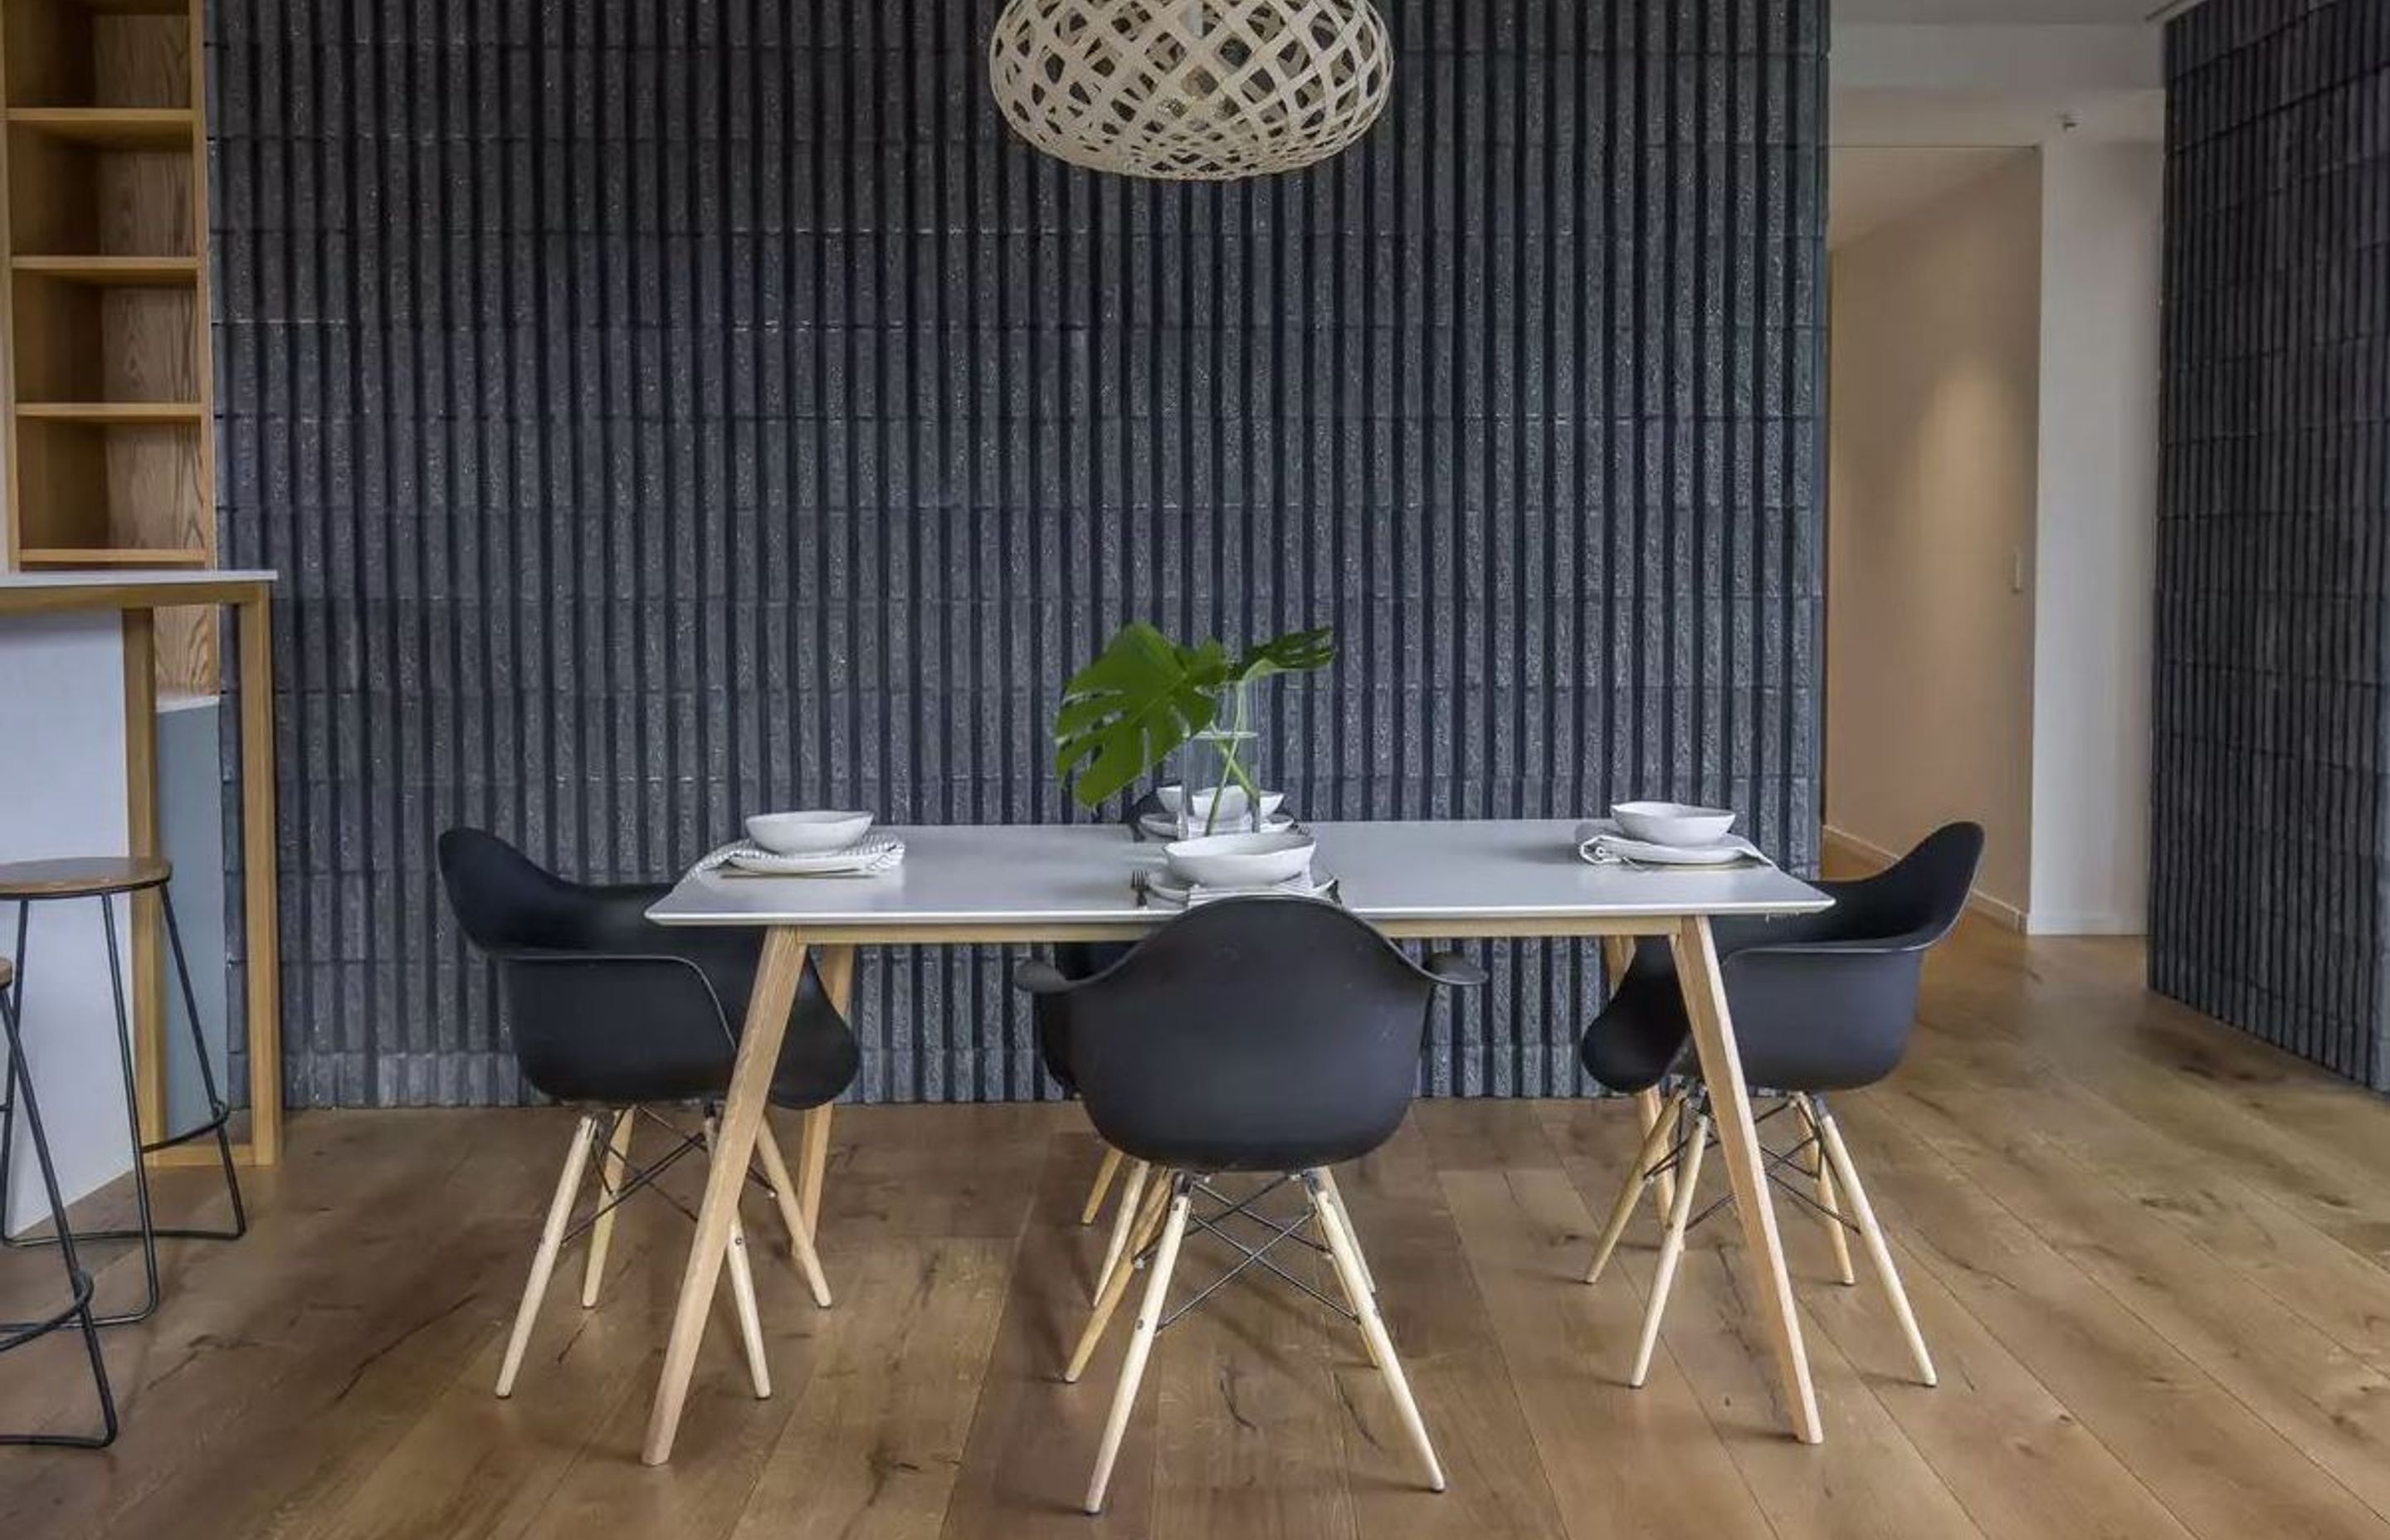 This dining room features oak flooring and a feature wall in charcoal-coloured, fluted-concrete blockwork.